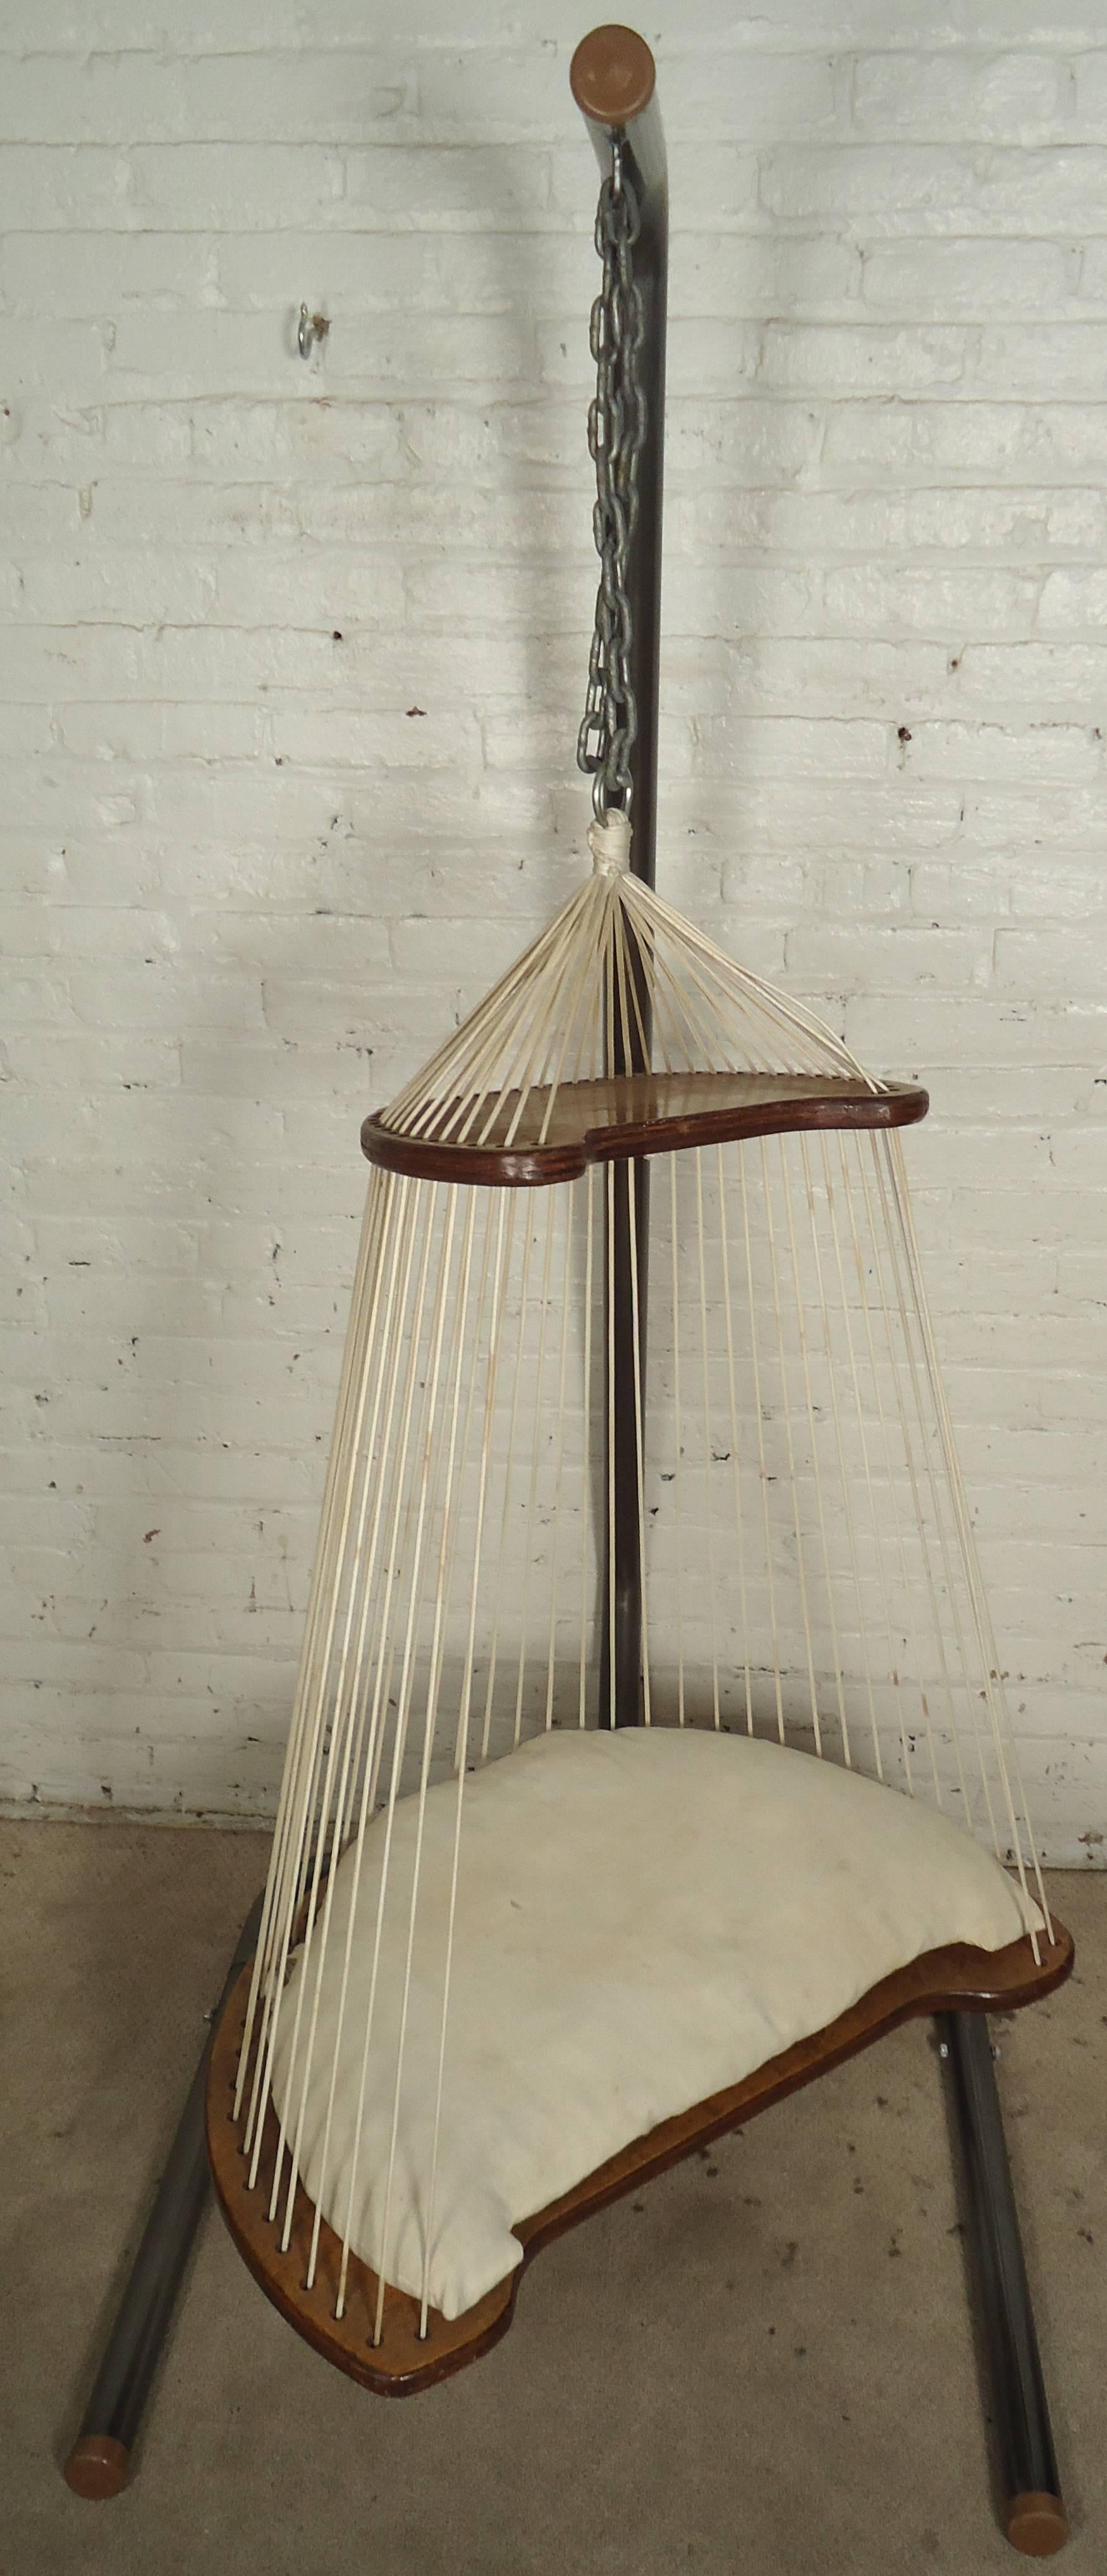 Unknown Unique Mid-Century Modern Hardwood & Rope Swing Chair